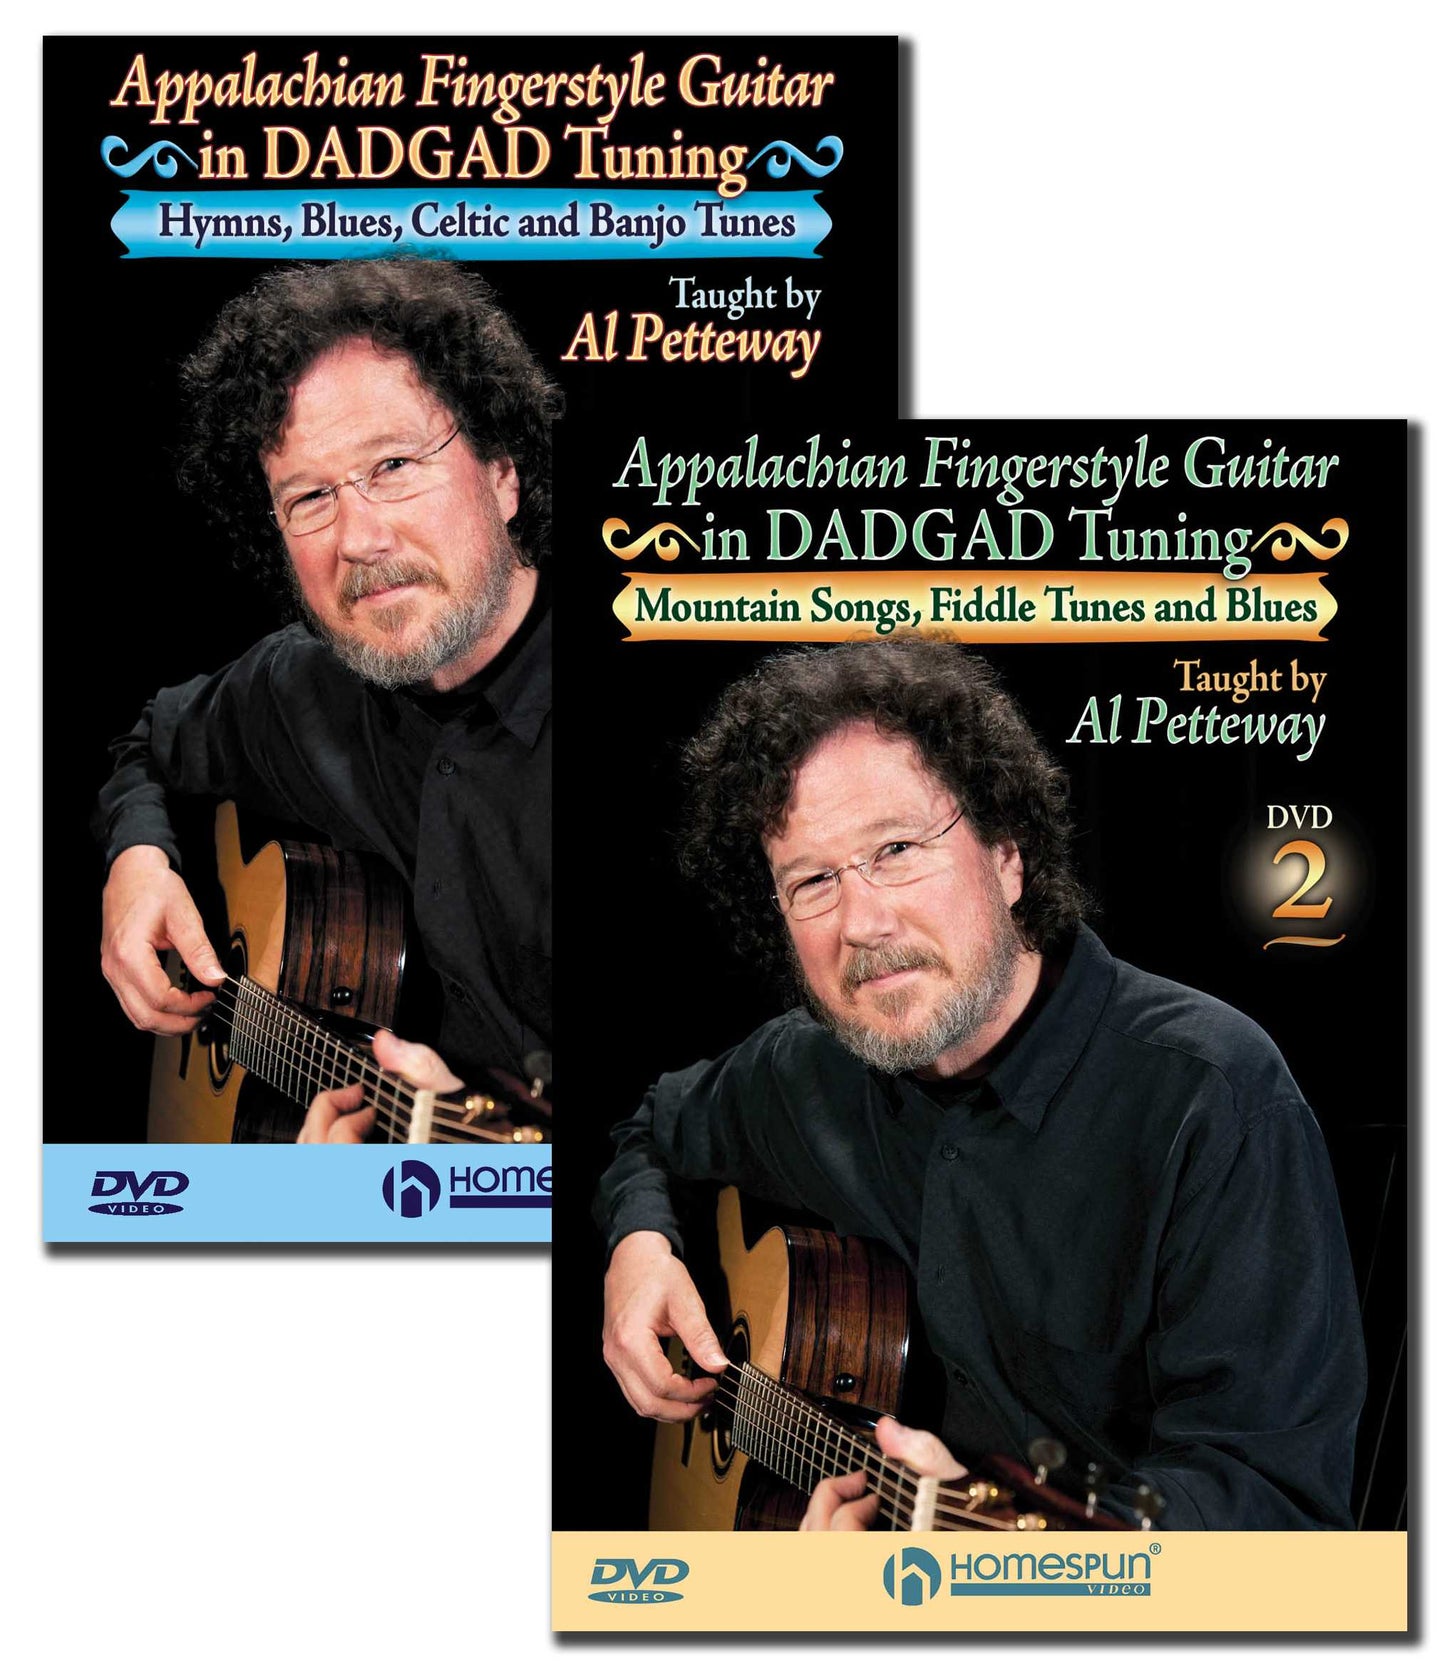 Image 1 of DVD - Appalachian Fingerstyle Guitar in DADGAD Tuning: Two DVD Set - SKU# 300-DVD446SET : Product Type Media : Elderly Instruments